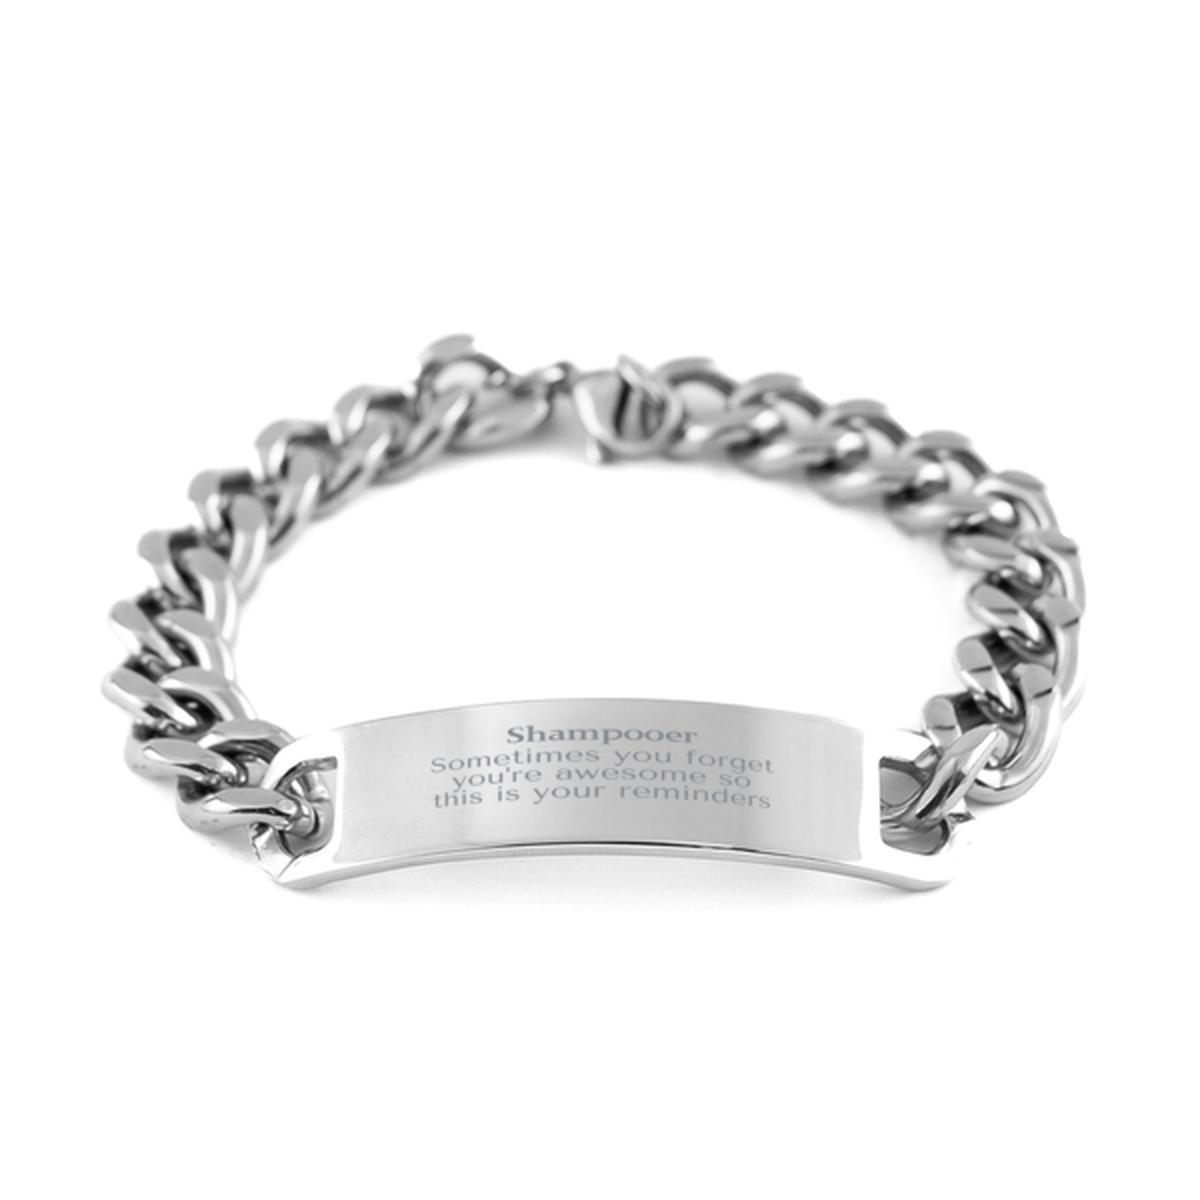 Sentimental Shampooer Cuban Chain Stainless Steel Bracelet, Shampooer Sometimes you forget you're awesome so this is your reminders, Graduation Christmas Birthday Gifts for Shampooer, Men, Women, Coworkers